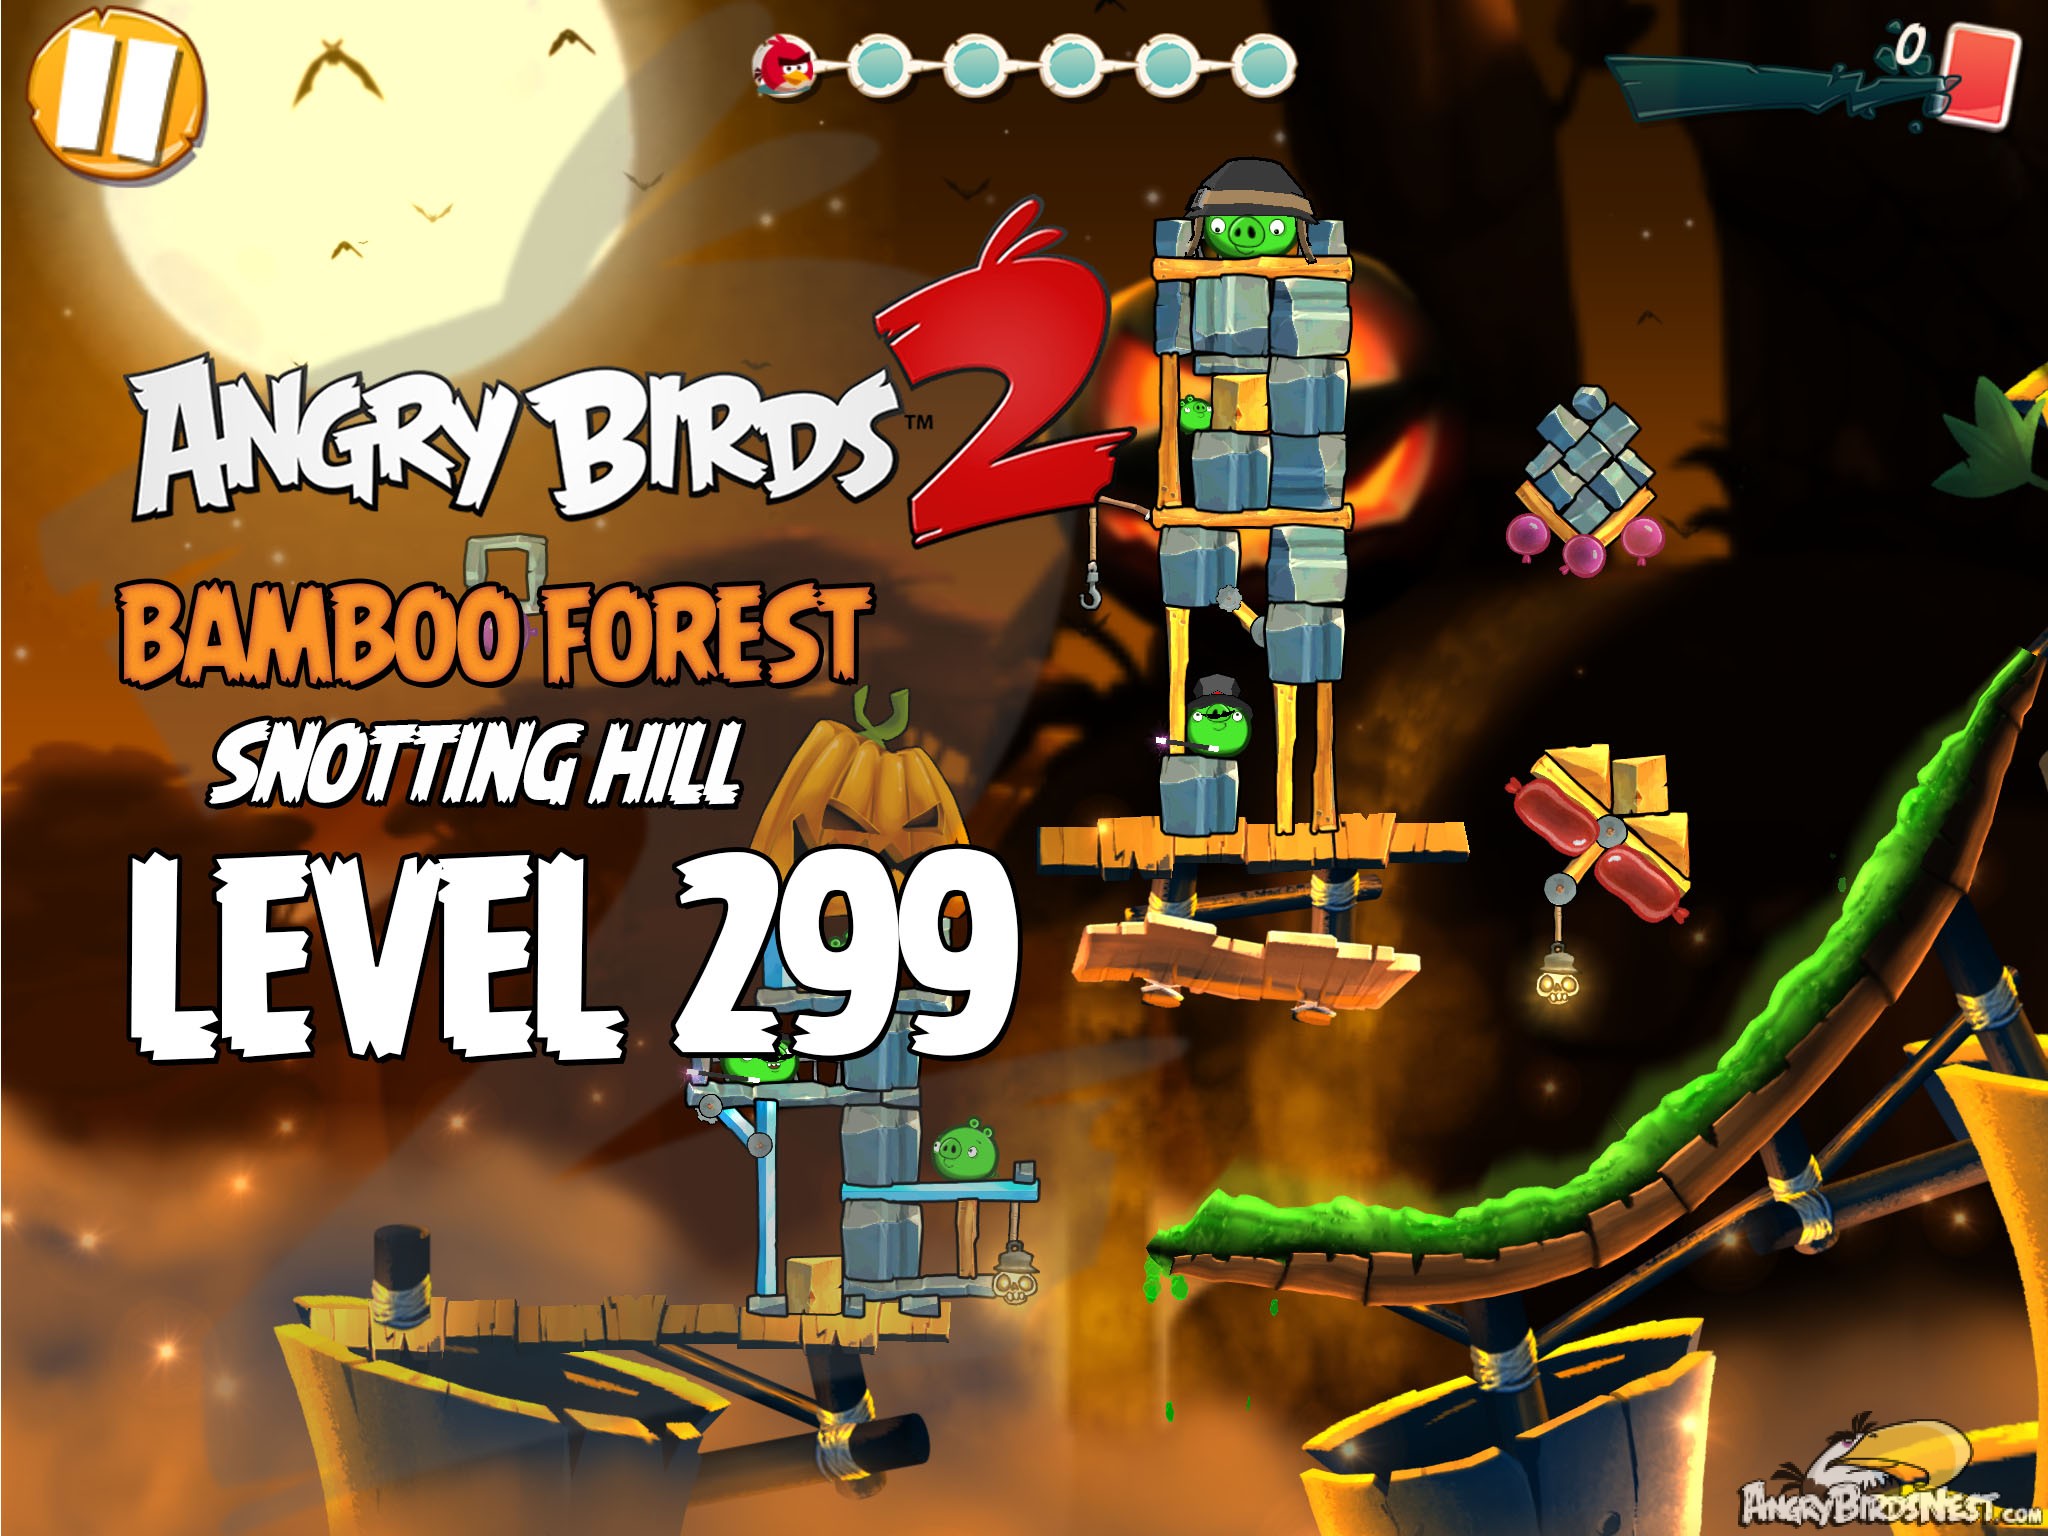 Angry Birds 2 Bambbo Forest Snotting Hill Level 299